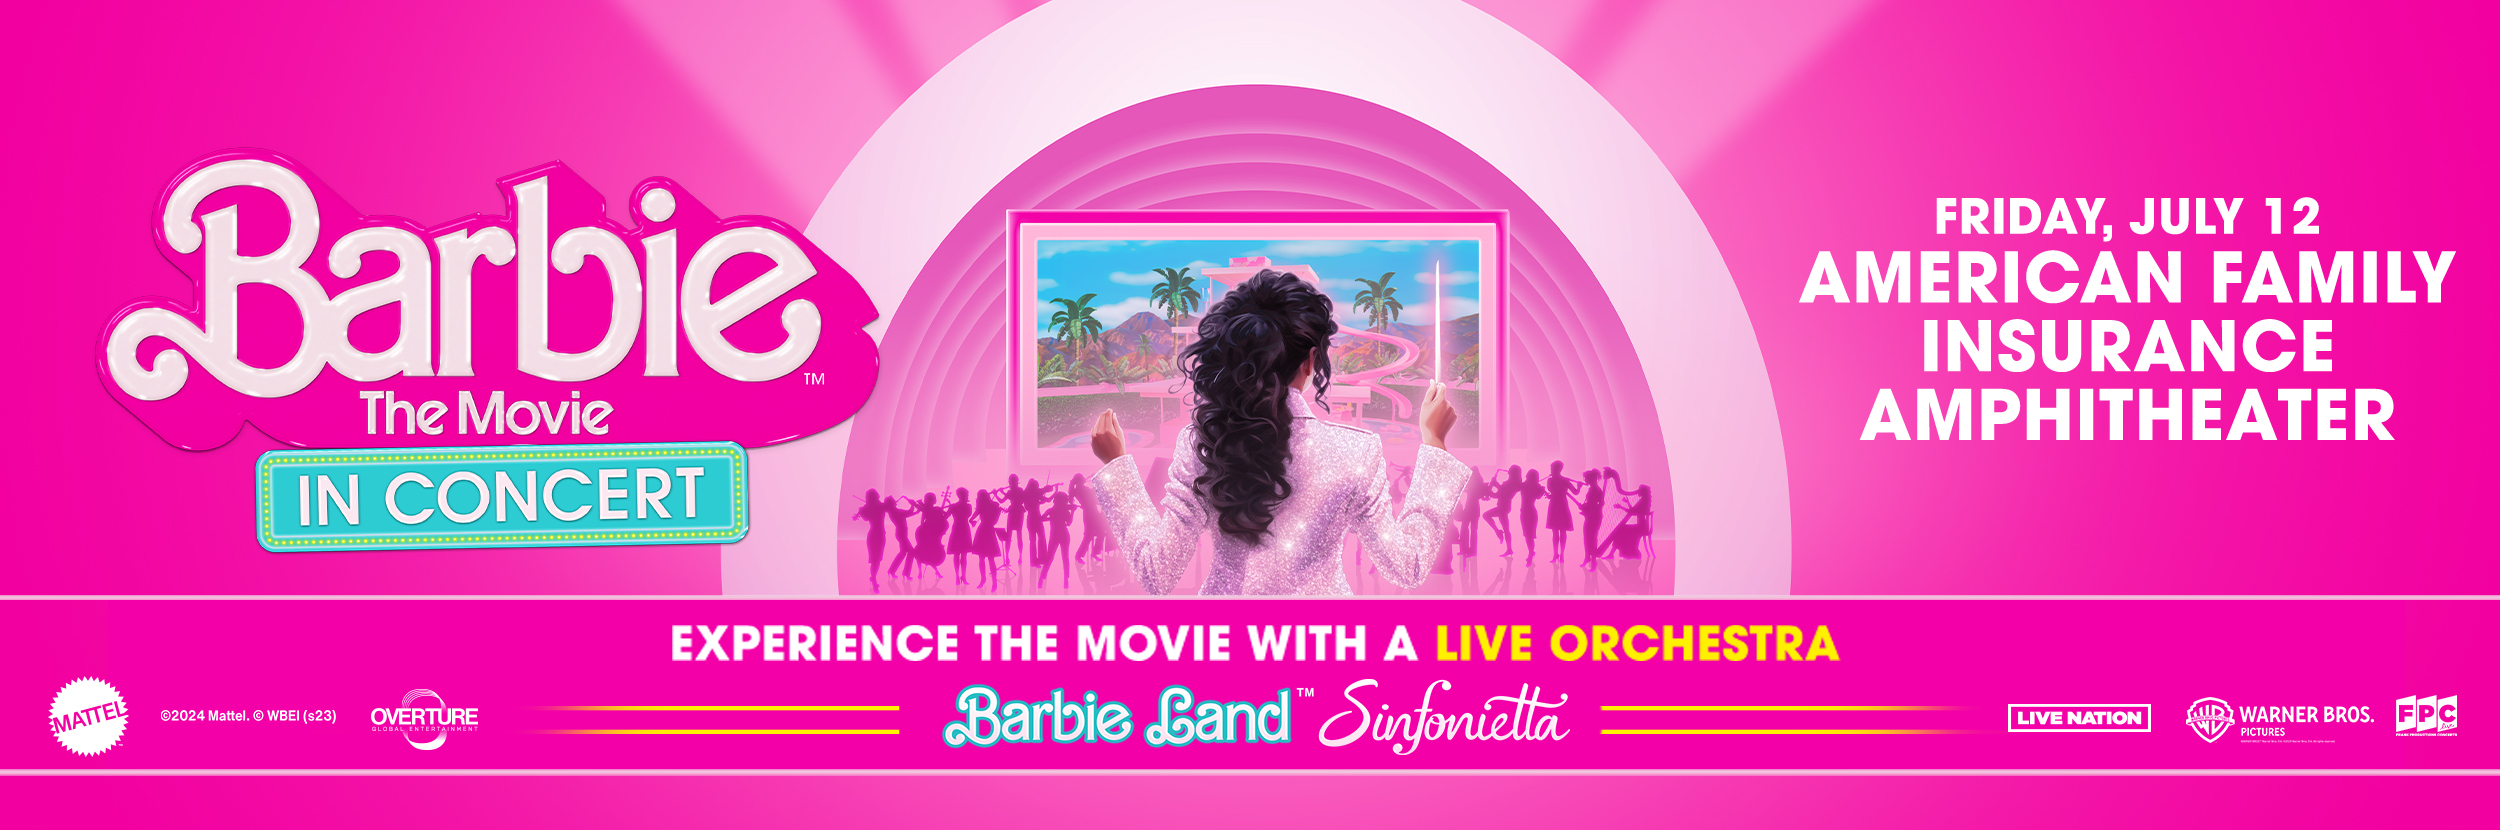 Barbie the Movie in Concert July 12